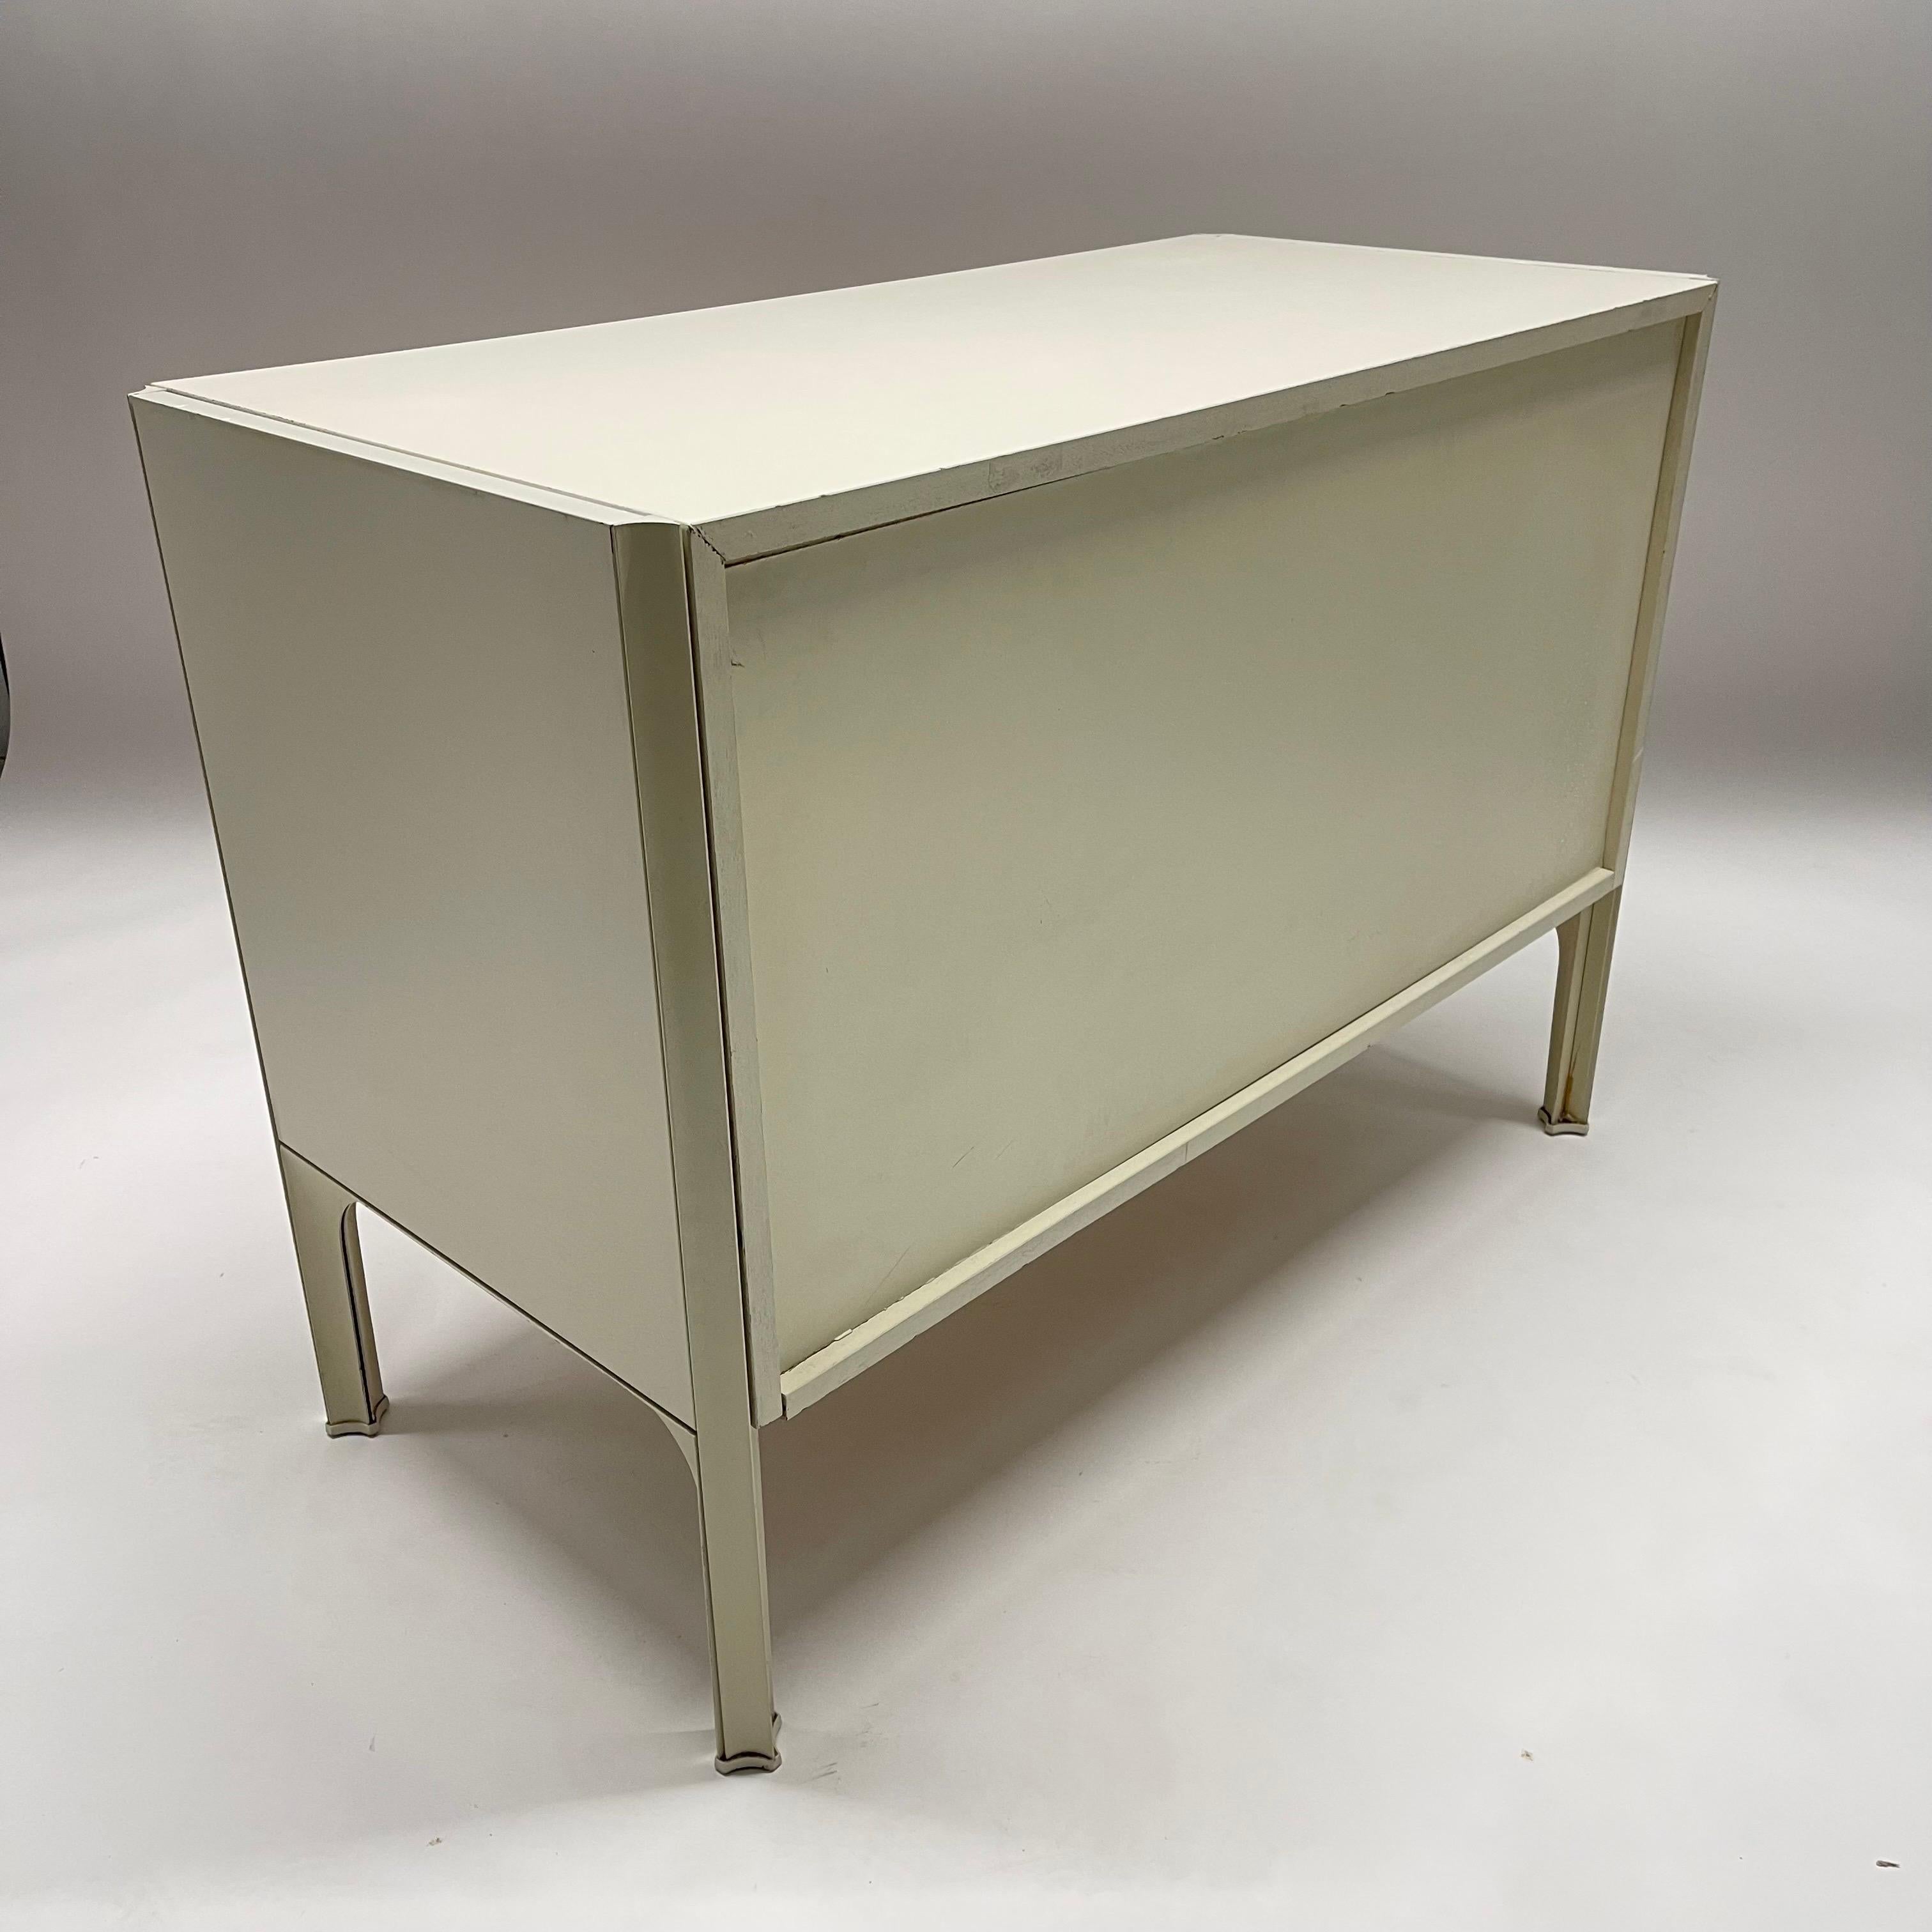 Lacquered Raymond Loewy DF-2000 Commode, Chest of Drawers, or Dresser, France, circa 1968